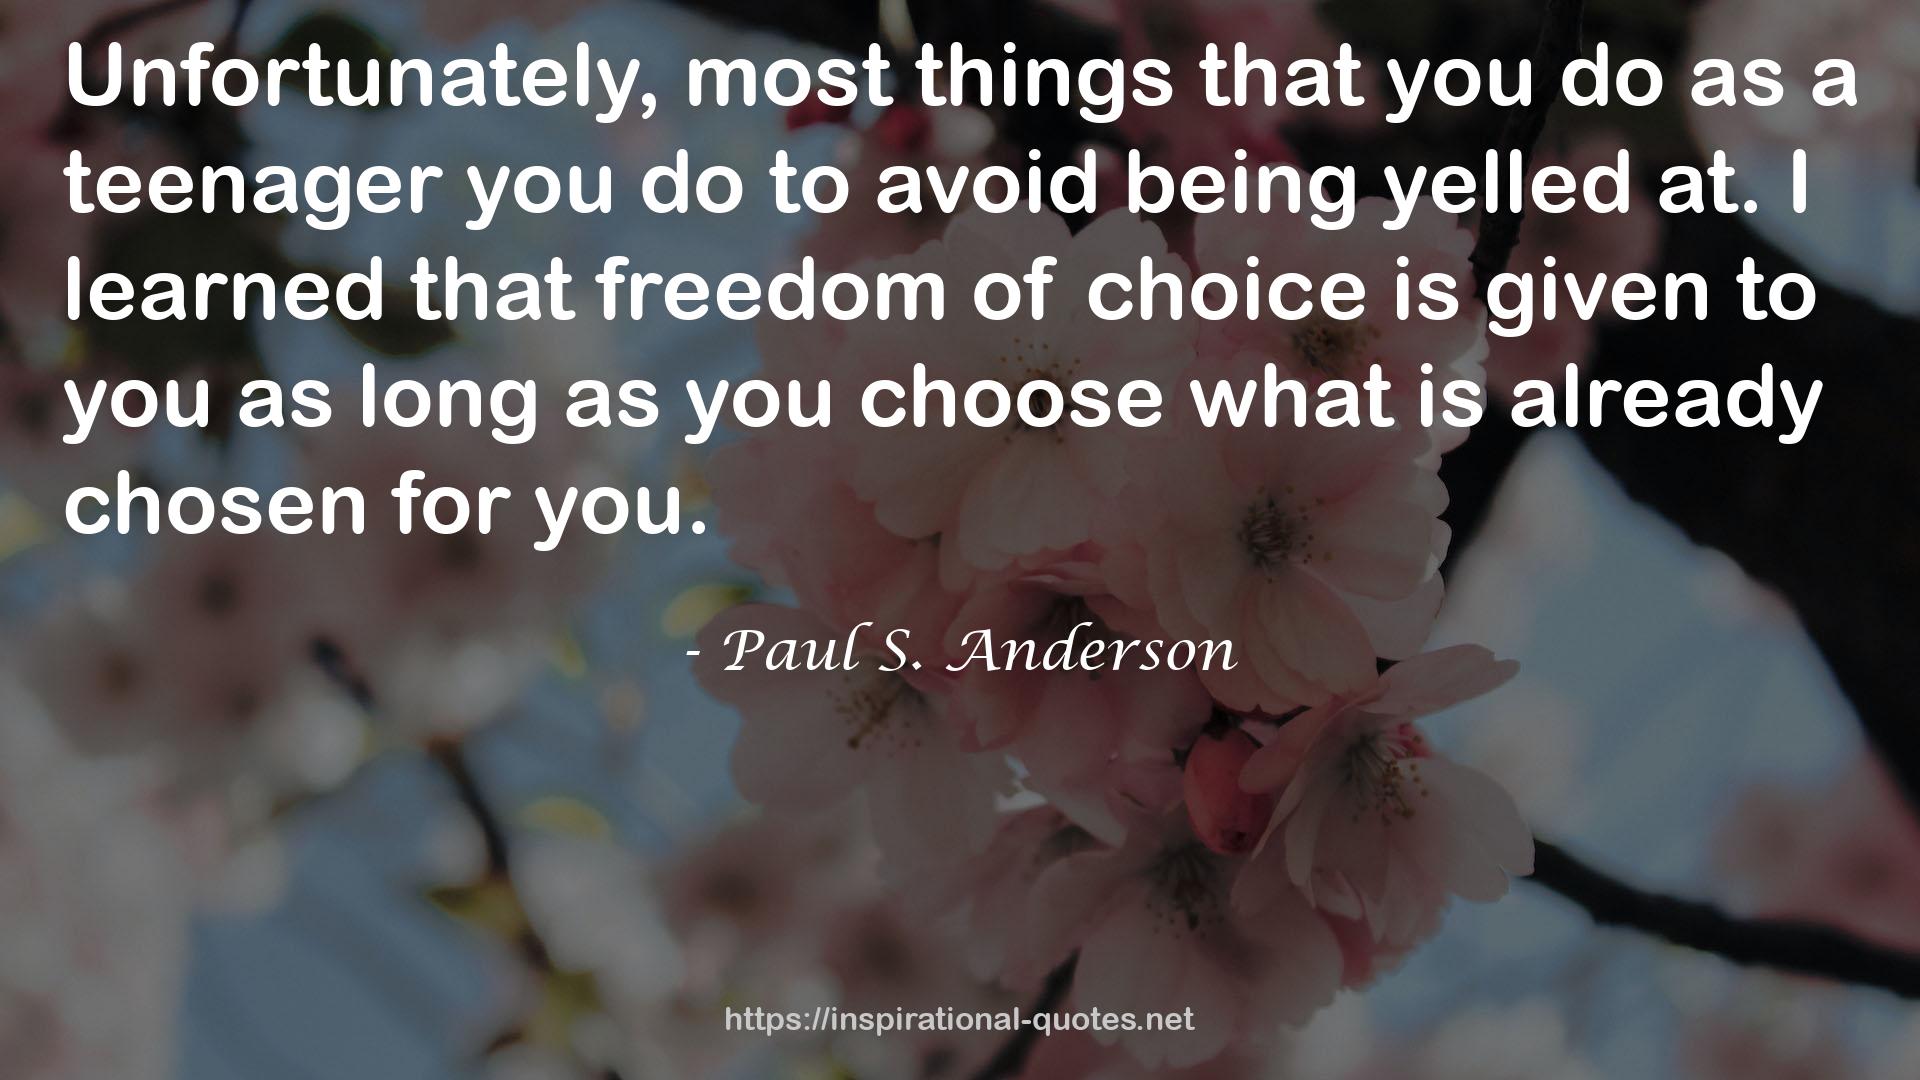 Paul S. Anderson QUOTES